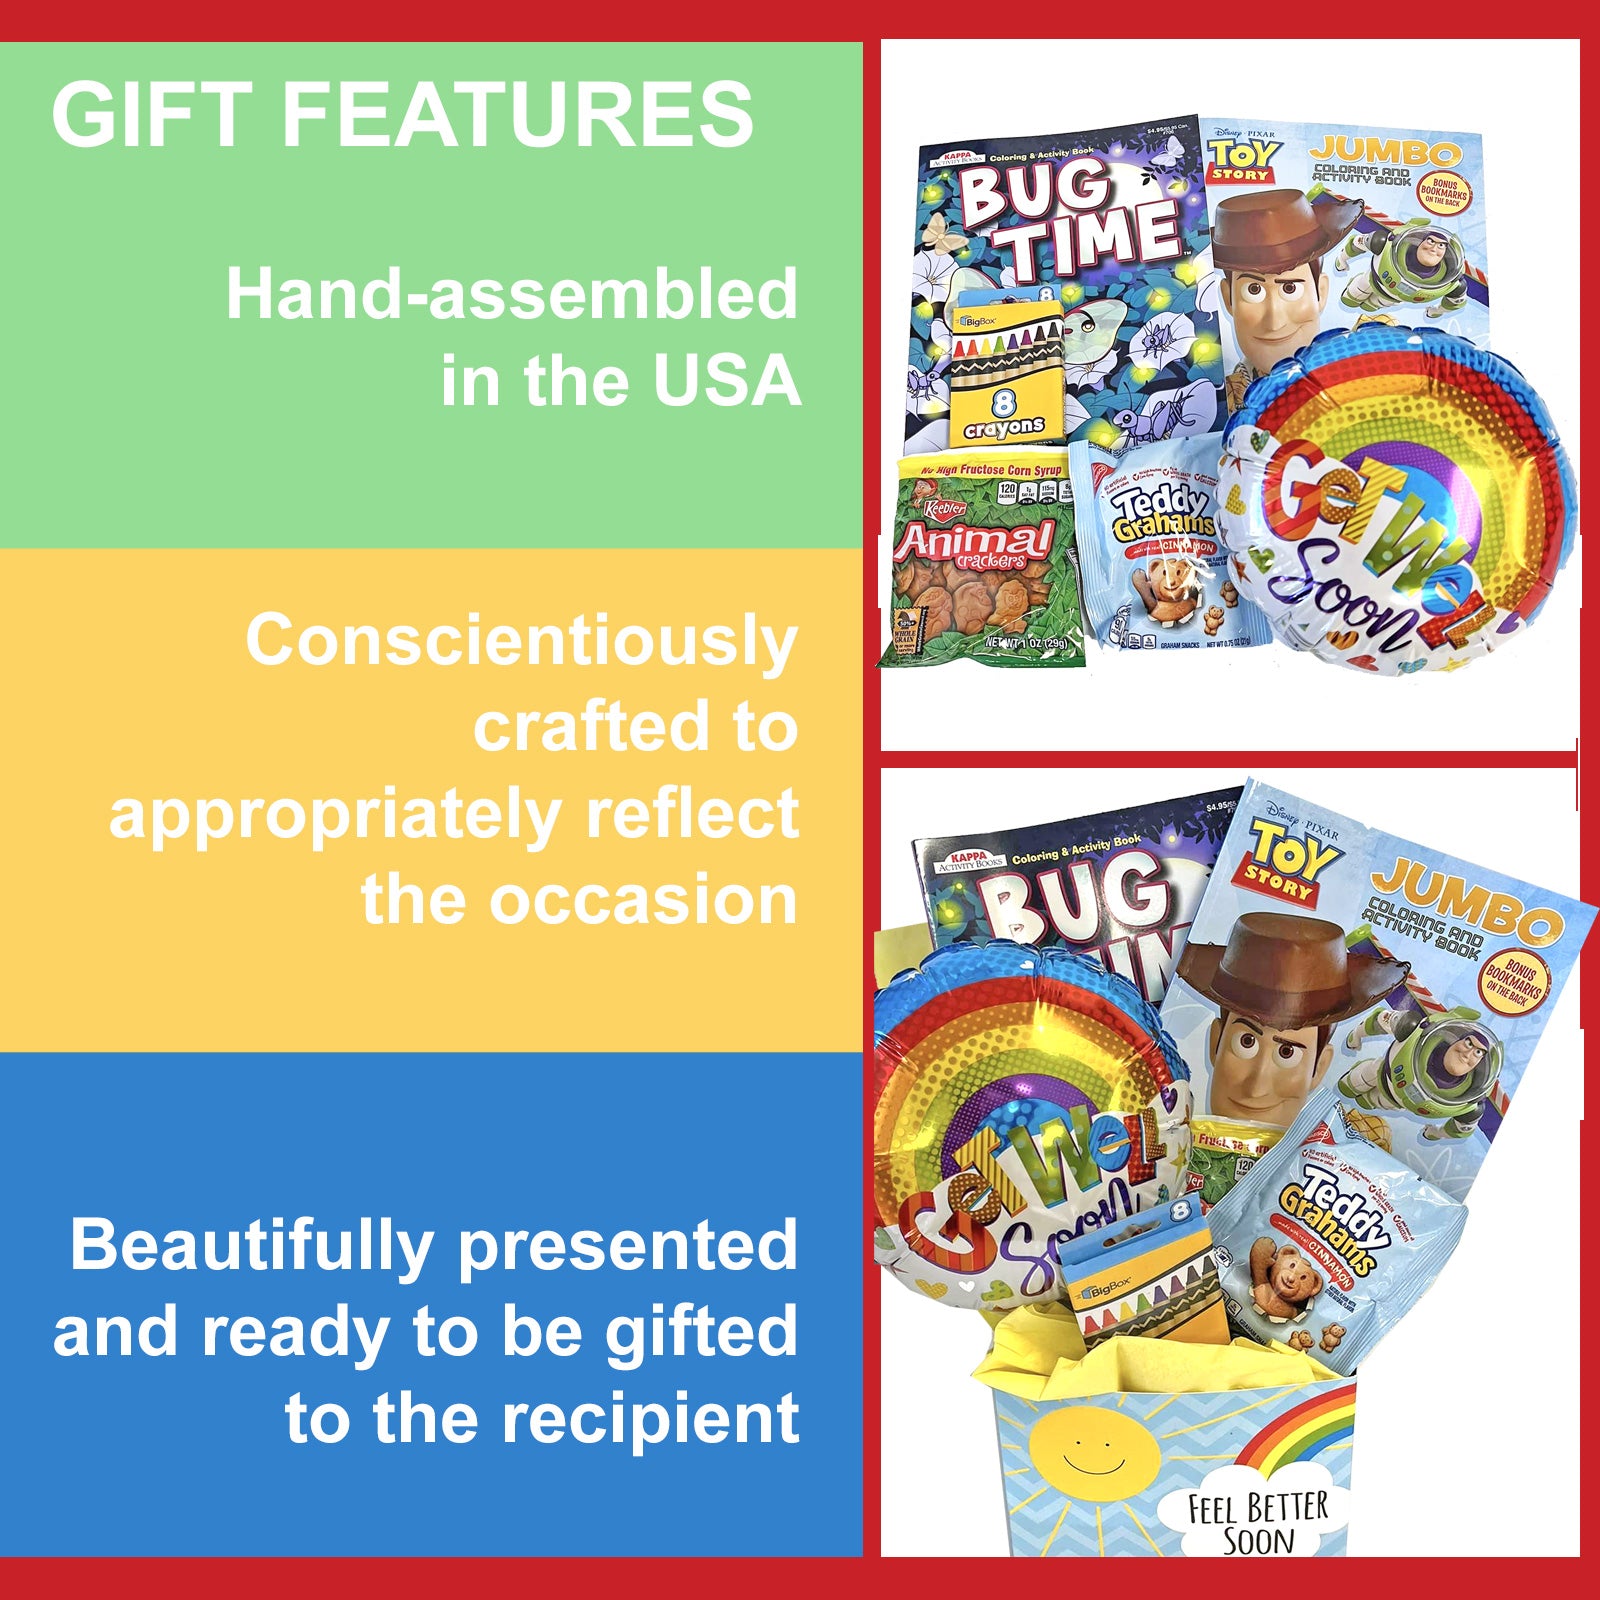 Kids Feel Better Gift Box for Boys and Girls Ages 3 to 10 with Activity Books, Snacks and Balloon